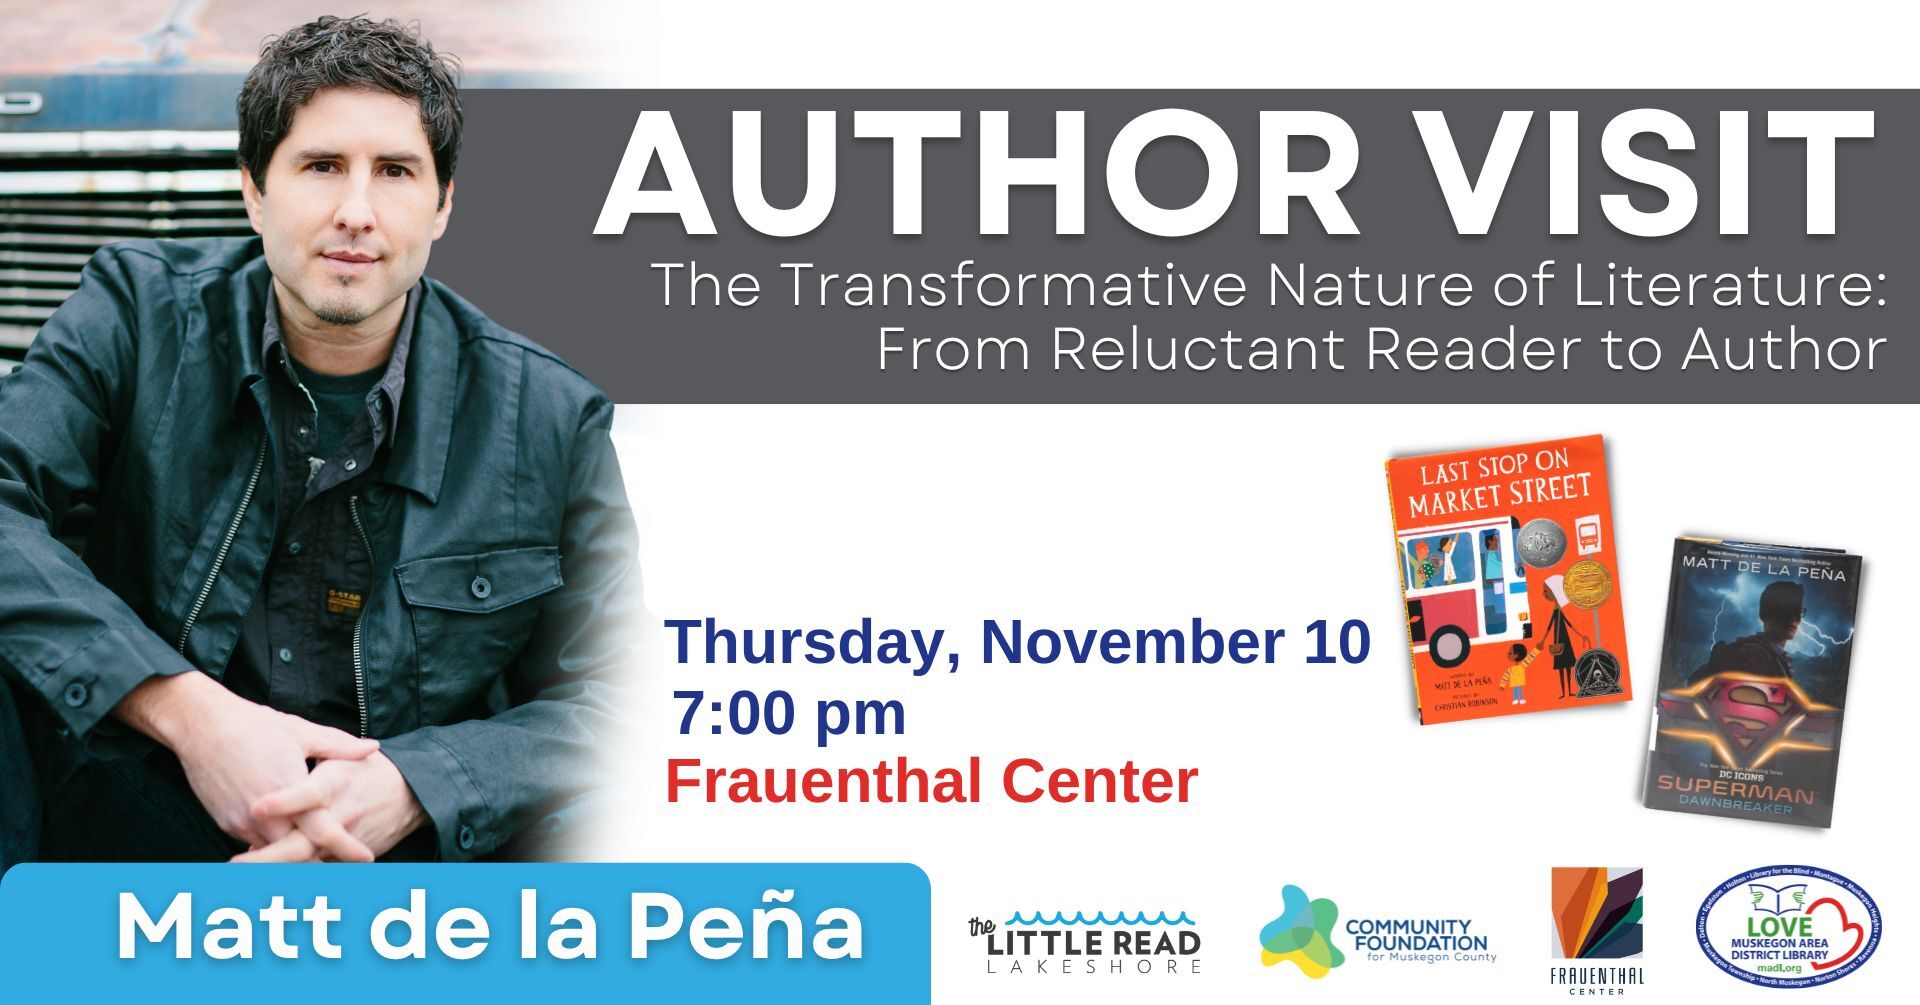 Author Visit:  The Transformative Nature of Literautre: From Reluctant Reader to Author Thursday, November 10 7:00 PM Frauenthal Center. Last Stop on Market Street.  Superman Dawnbreaker. Matt de la Pena. Muskegon Area District Library Logo. Community Foundation for Muskegon County Logo. The little Read Lakeshore logo. 